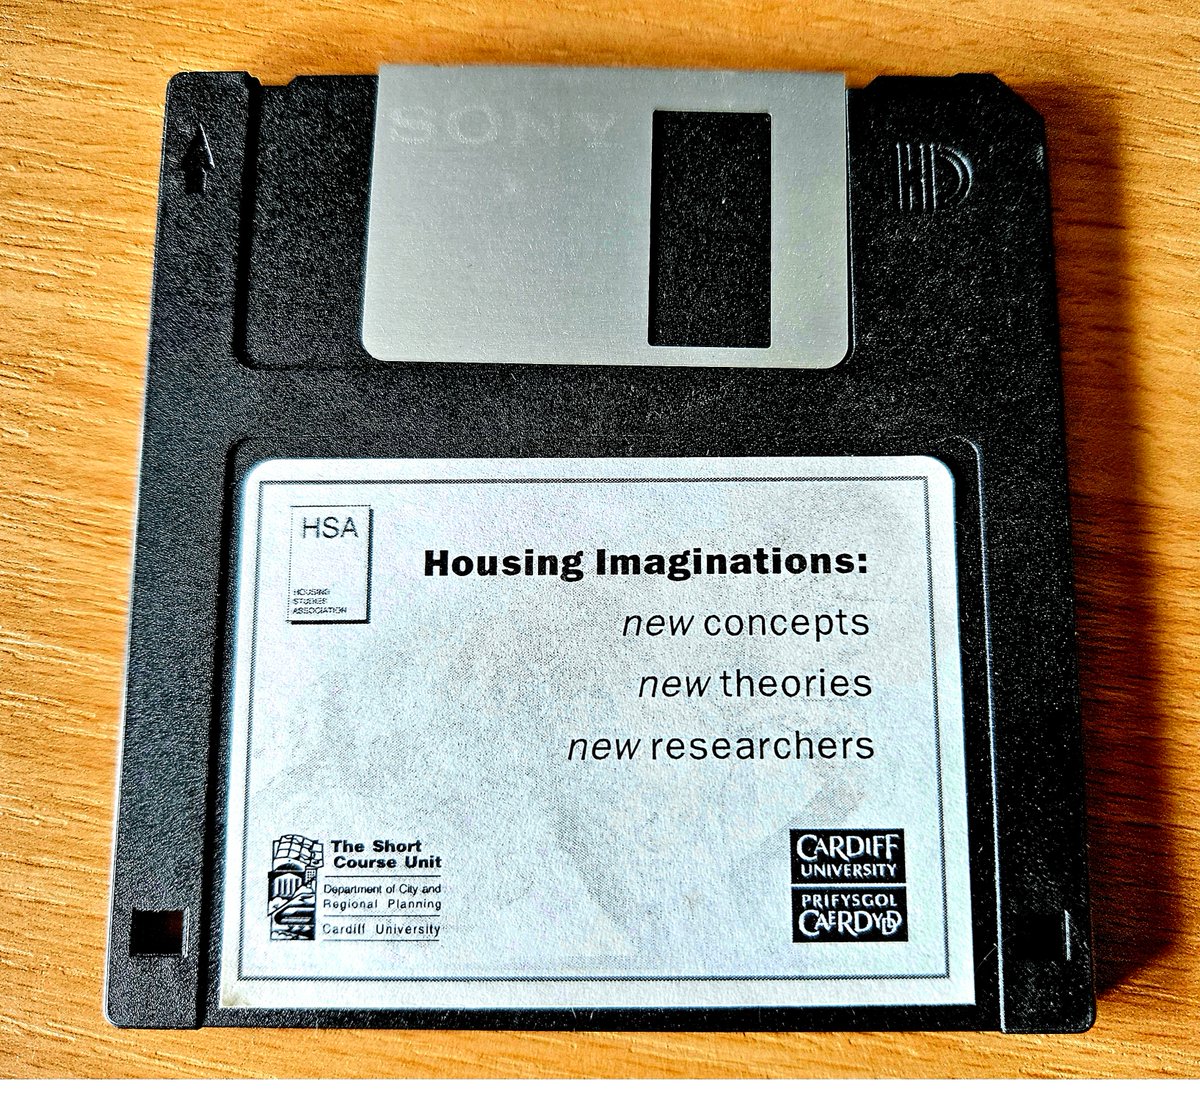 Many people might not know what this piece of plastic is. All delegates at the @HSA_UK #HousingImaginations Autumn 2001 conference had one to take away with them. It contained all of the submitted conference papers. At this time the average house price in Wales was £60,603.